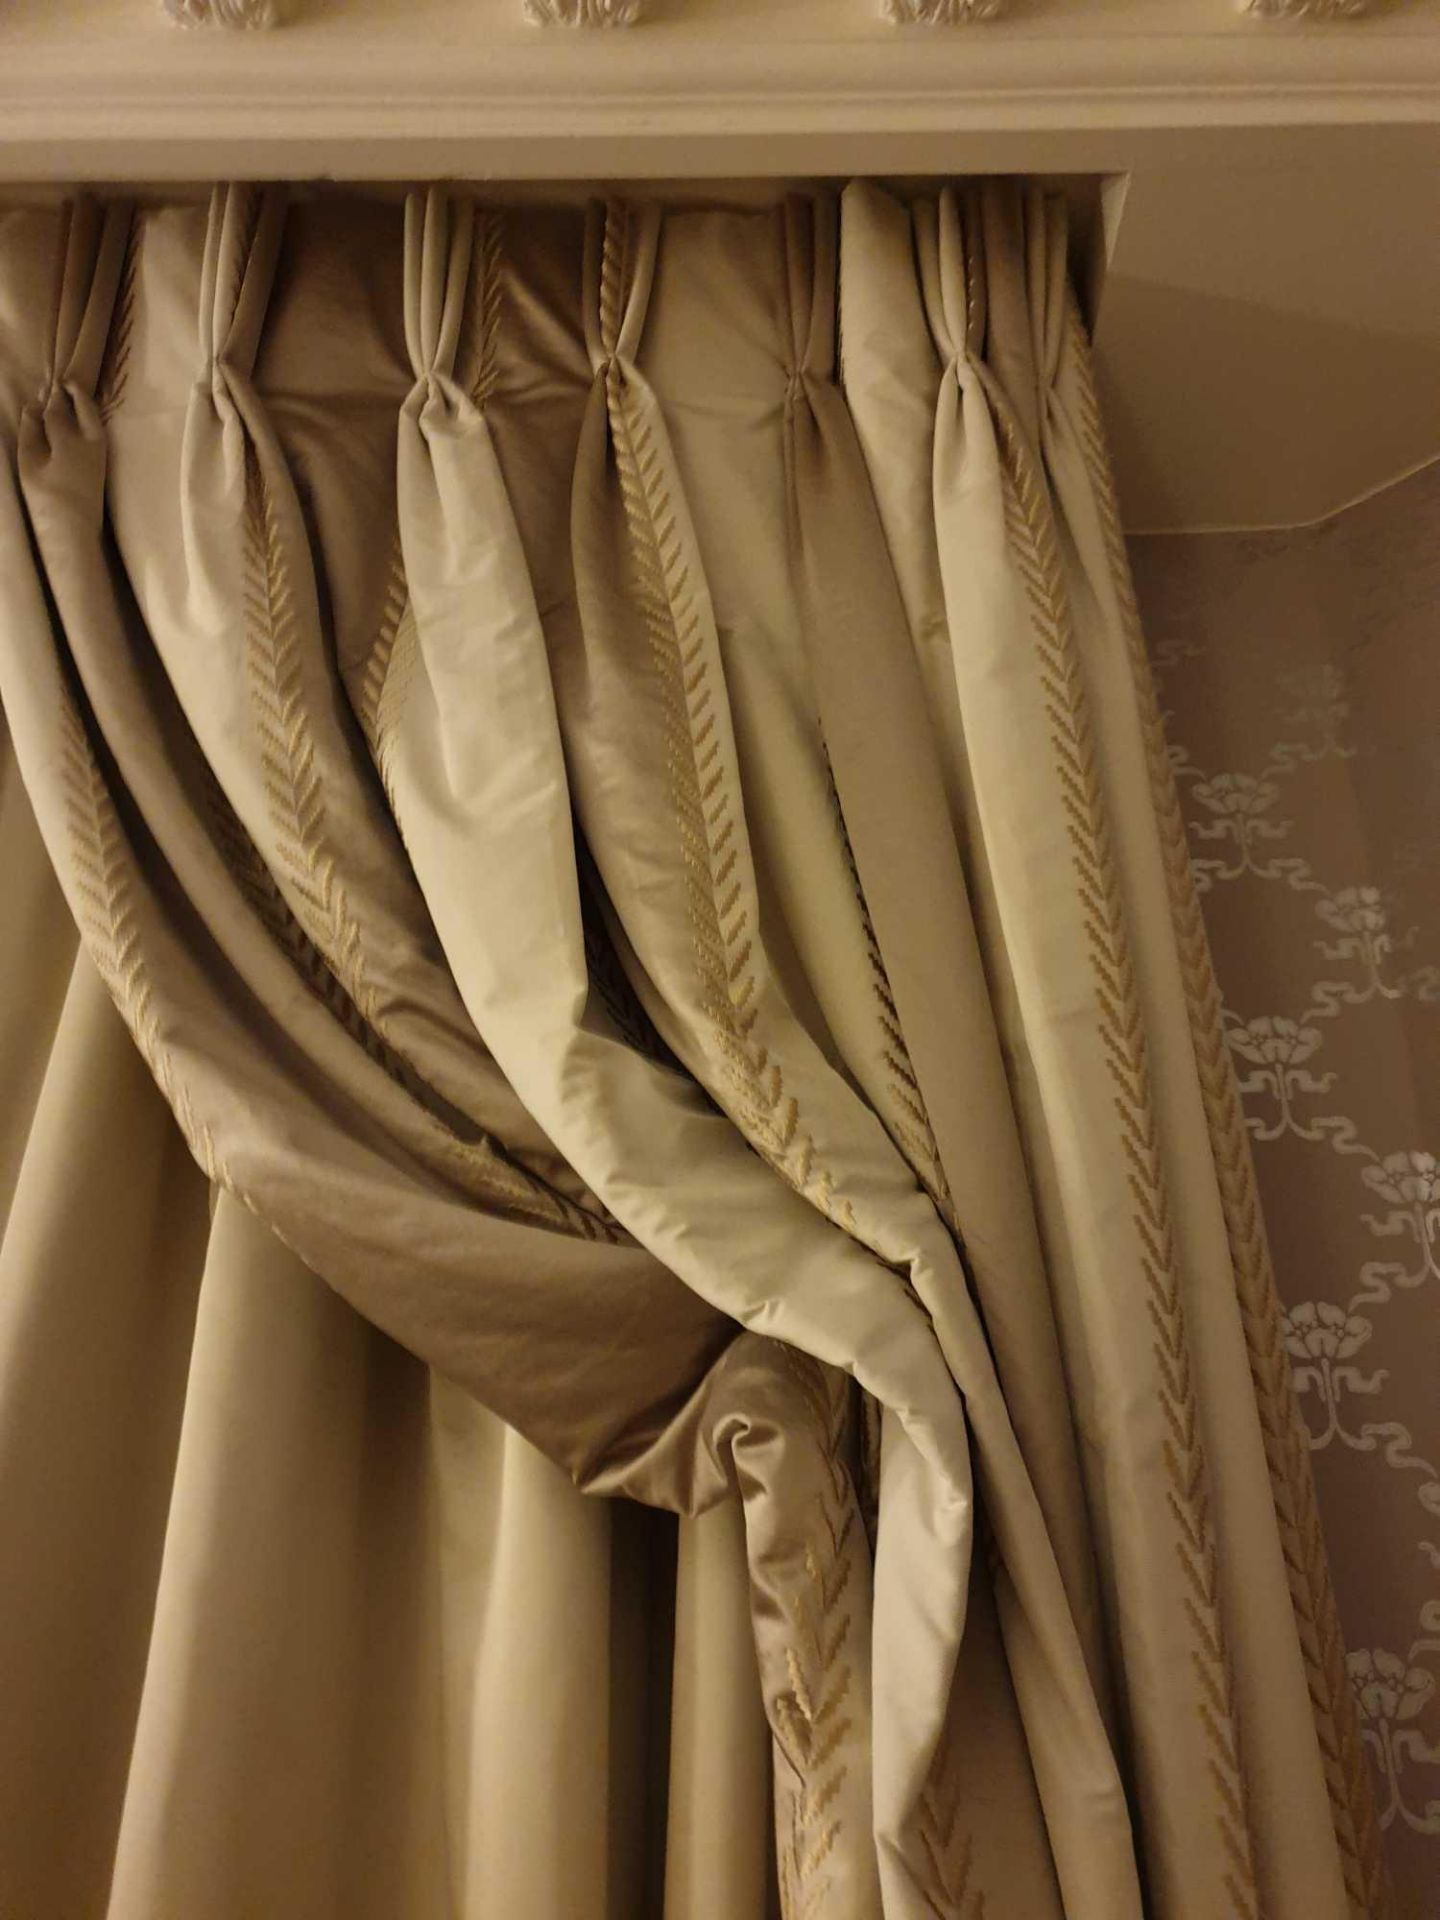 A Pair Of Silk Drapes And Jabots In Pale Gold And Dark Gold Large Stripes With Intermittent Gold - Image 2 of 3